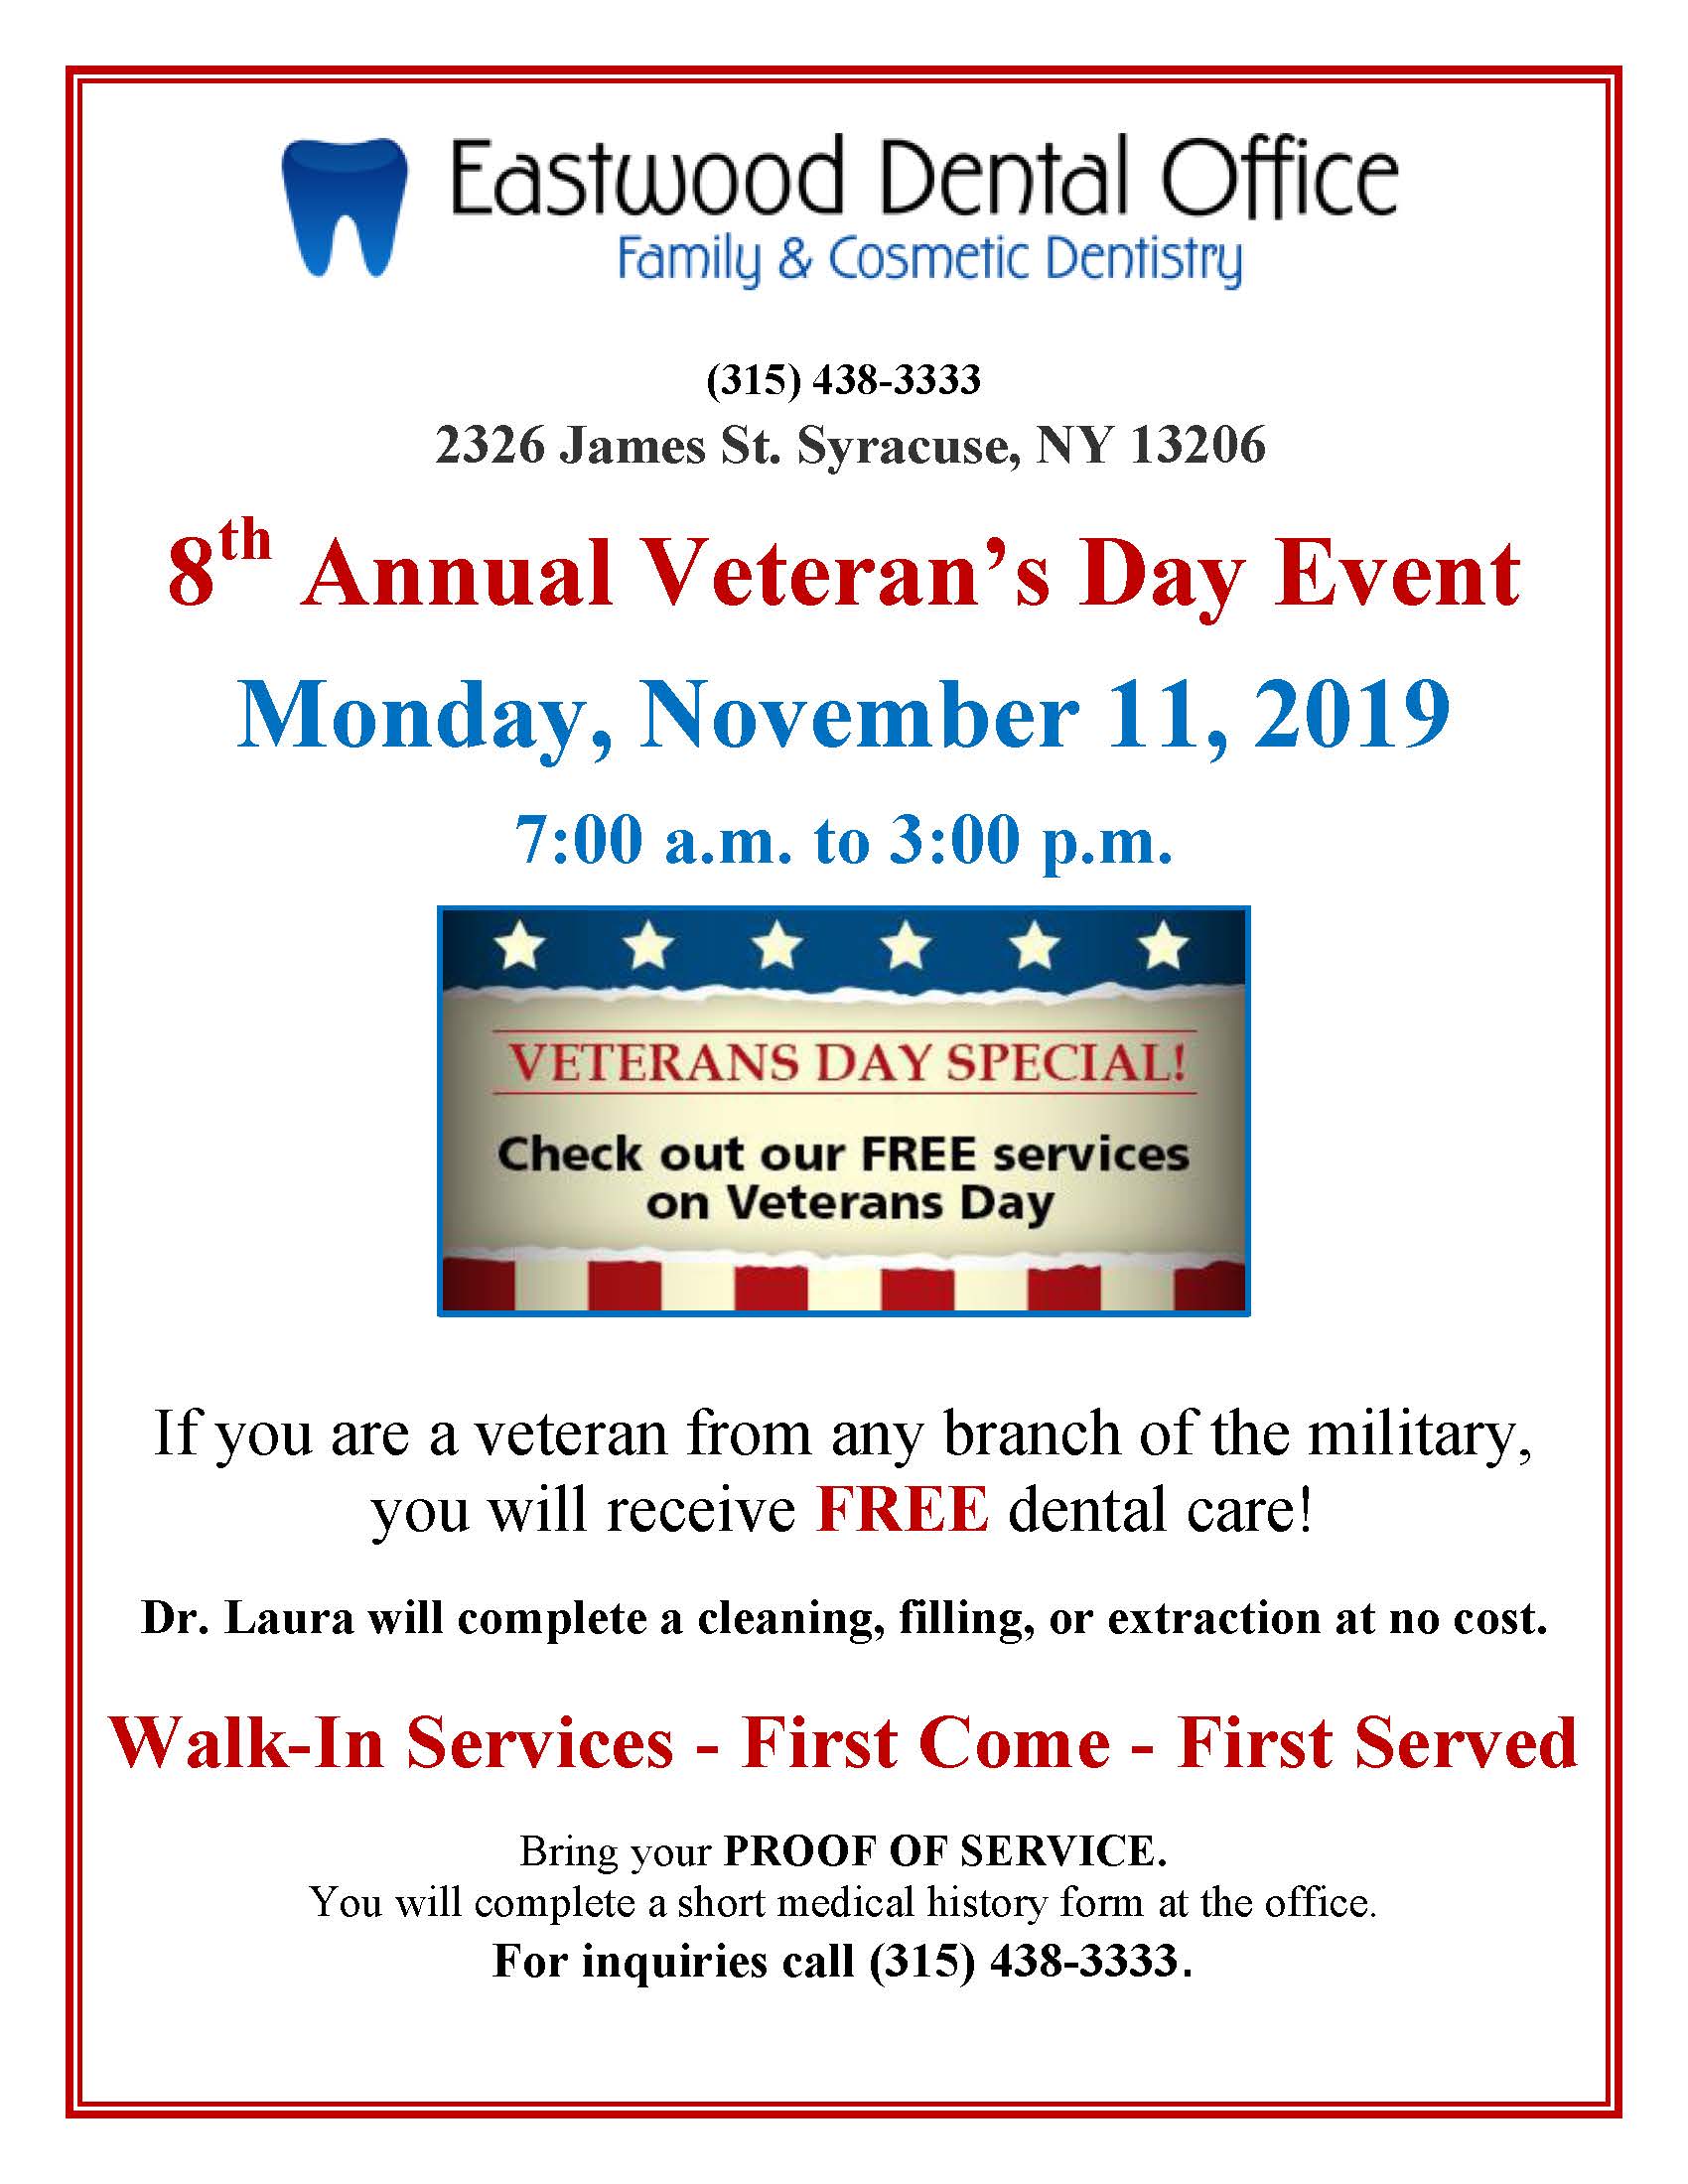 Veterans Day Promotions Freebies Deals And More 2019